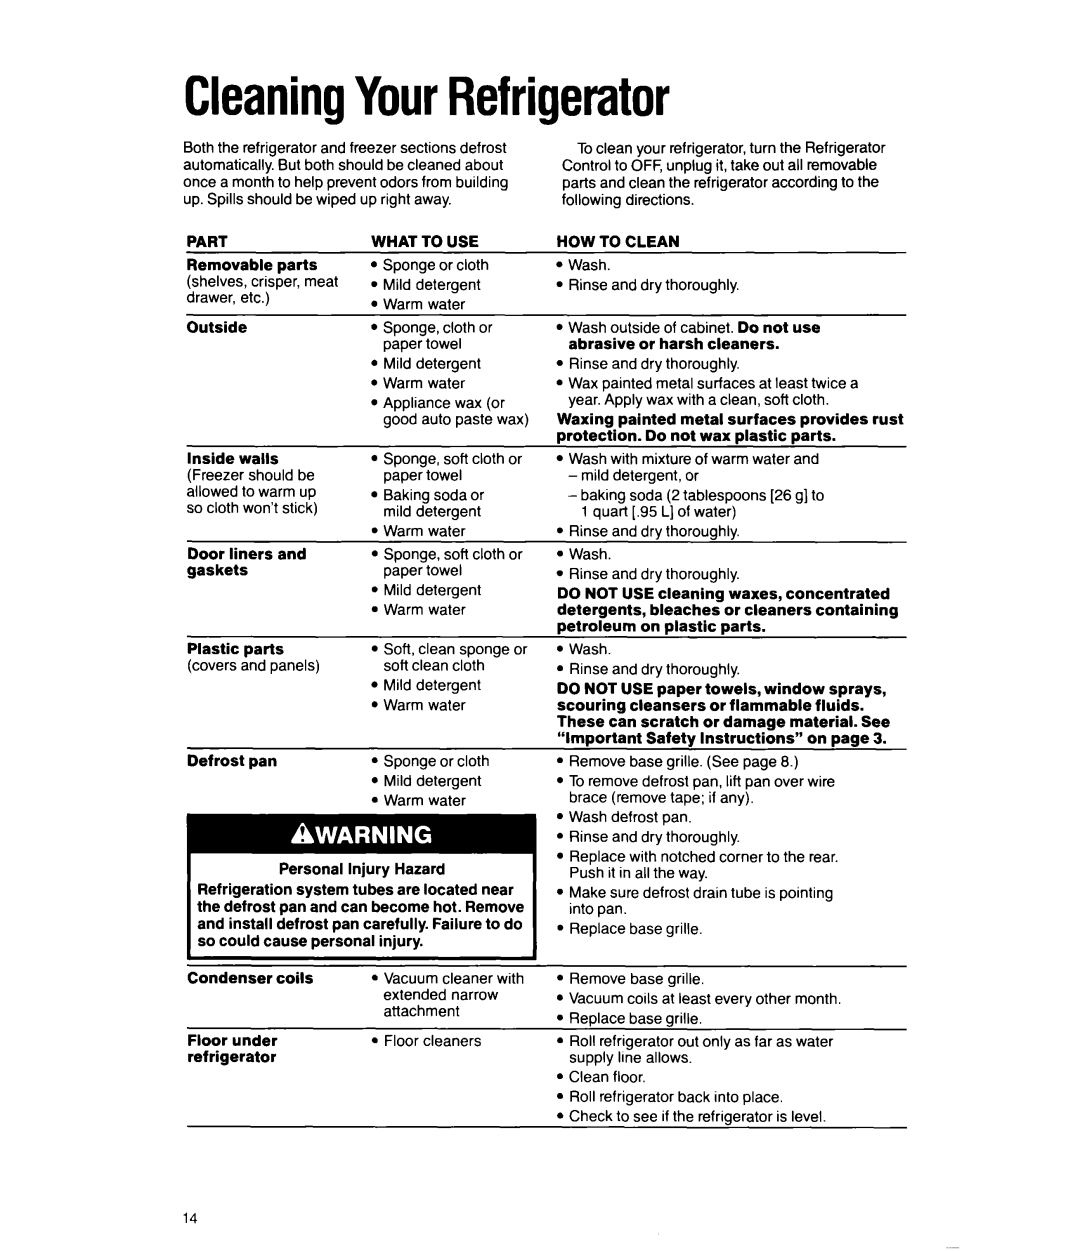 Whirlpool ED25PW manual CleaningYourRefrigerator 